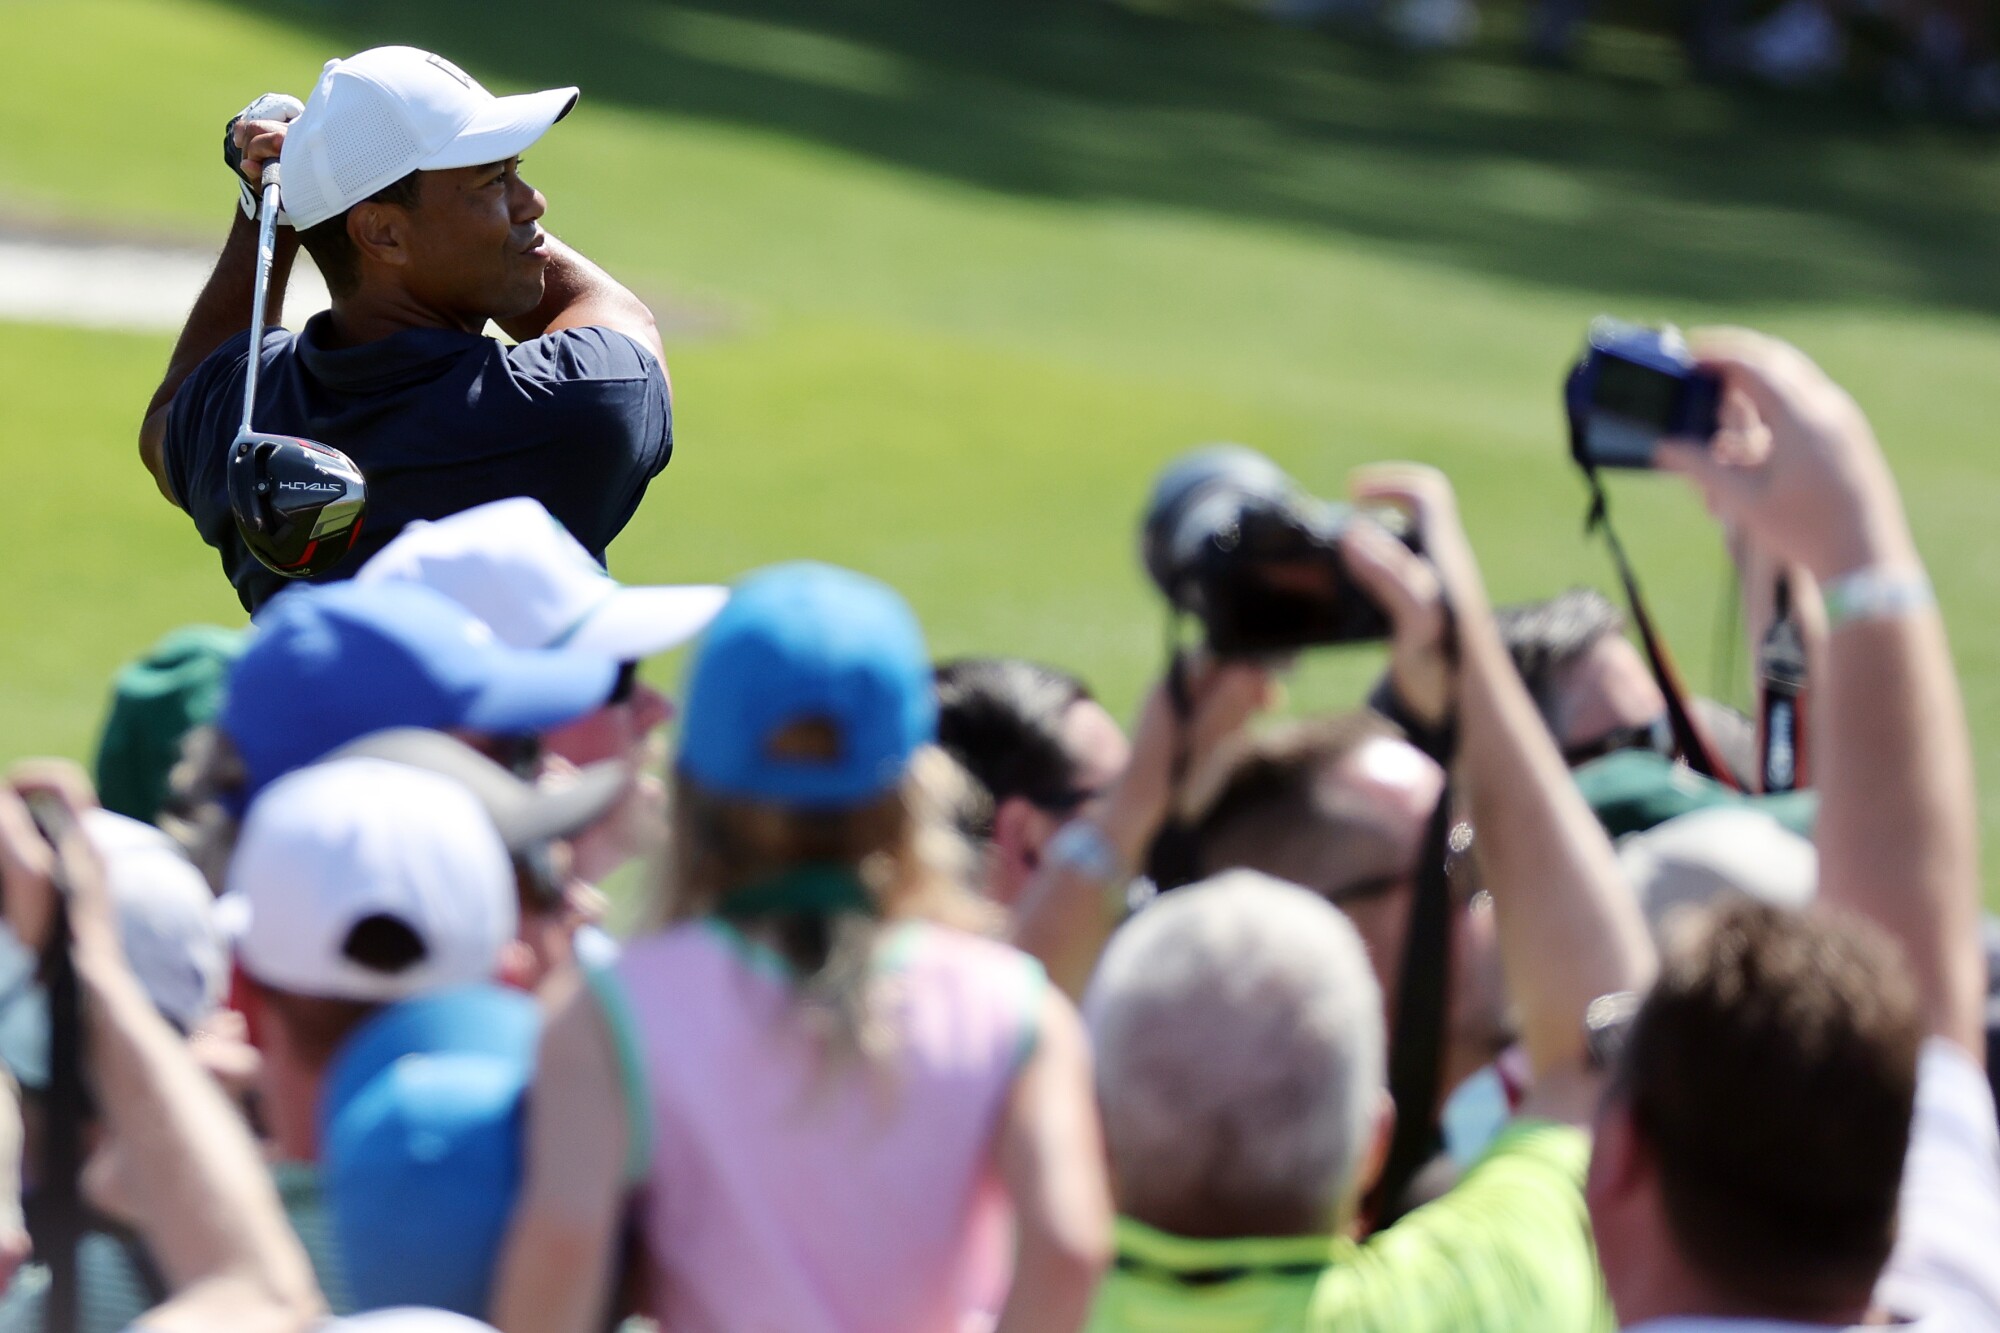 People take photos as Tiger Woods swings a club